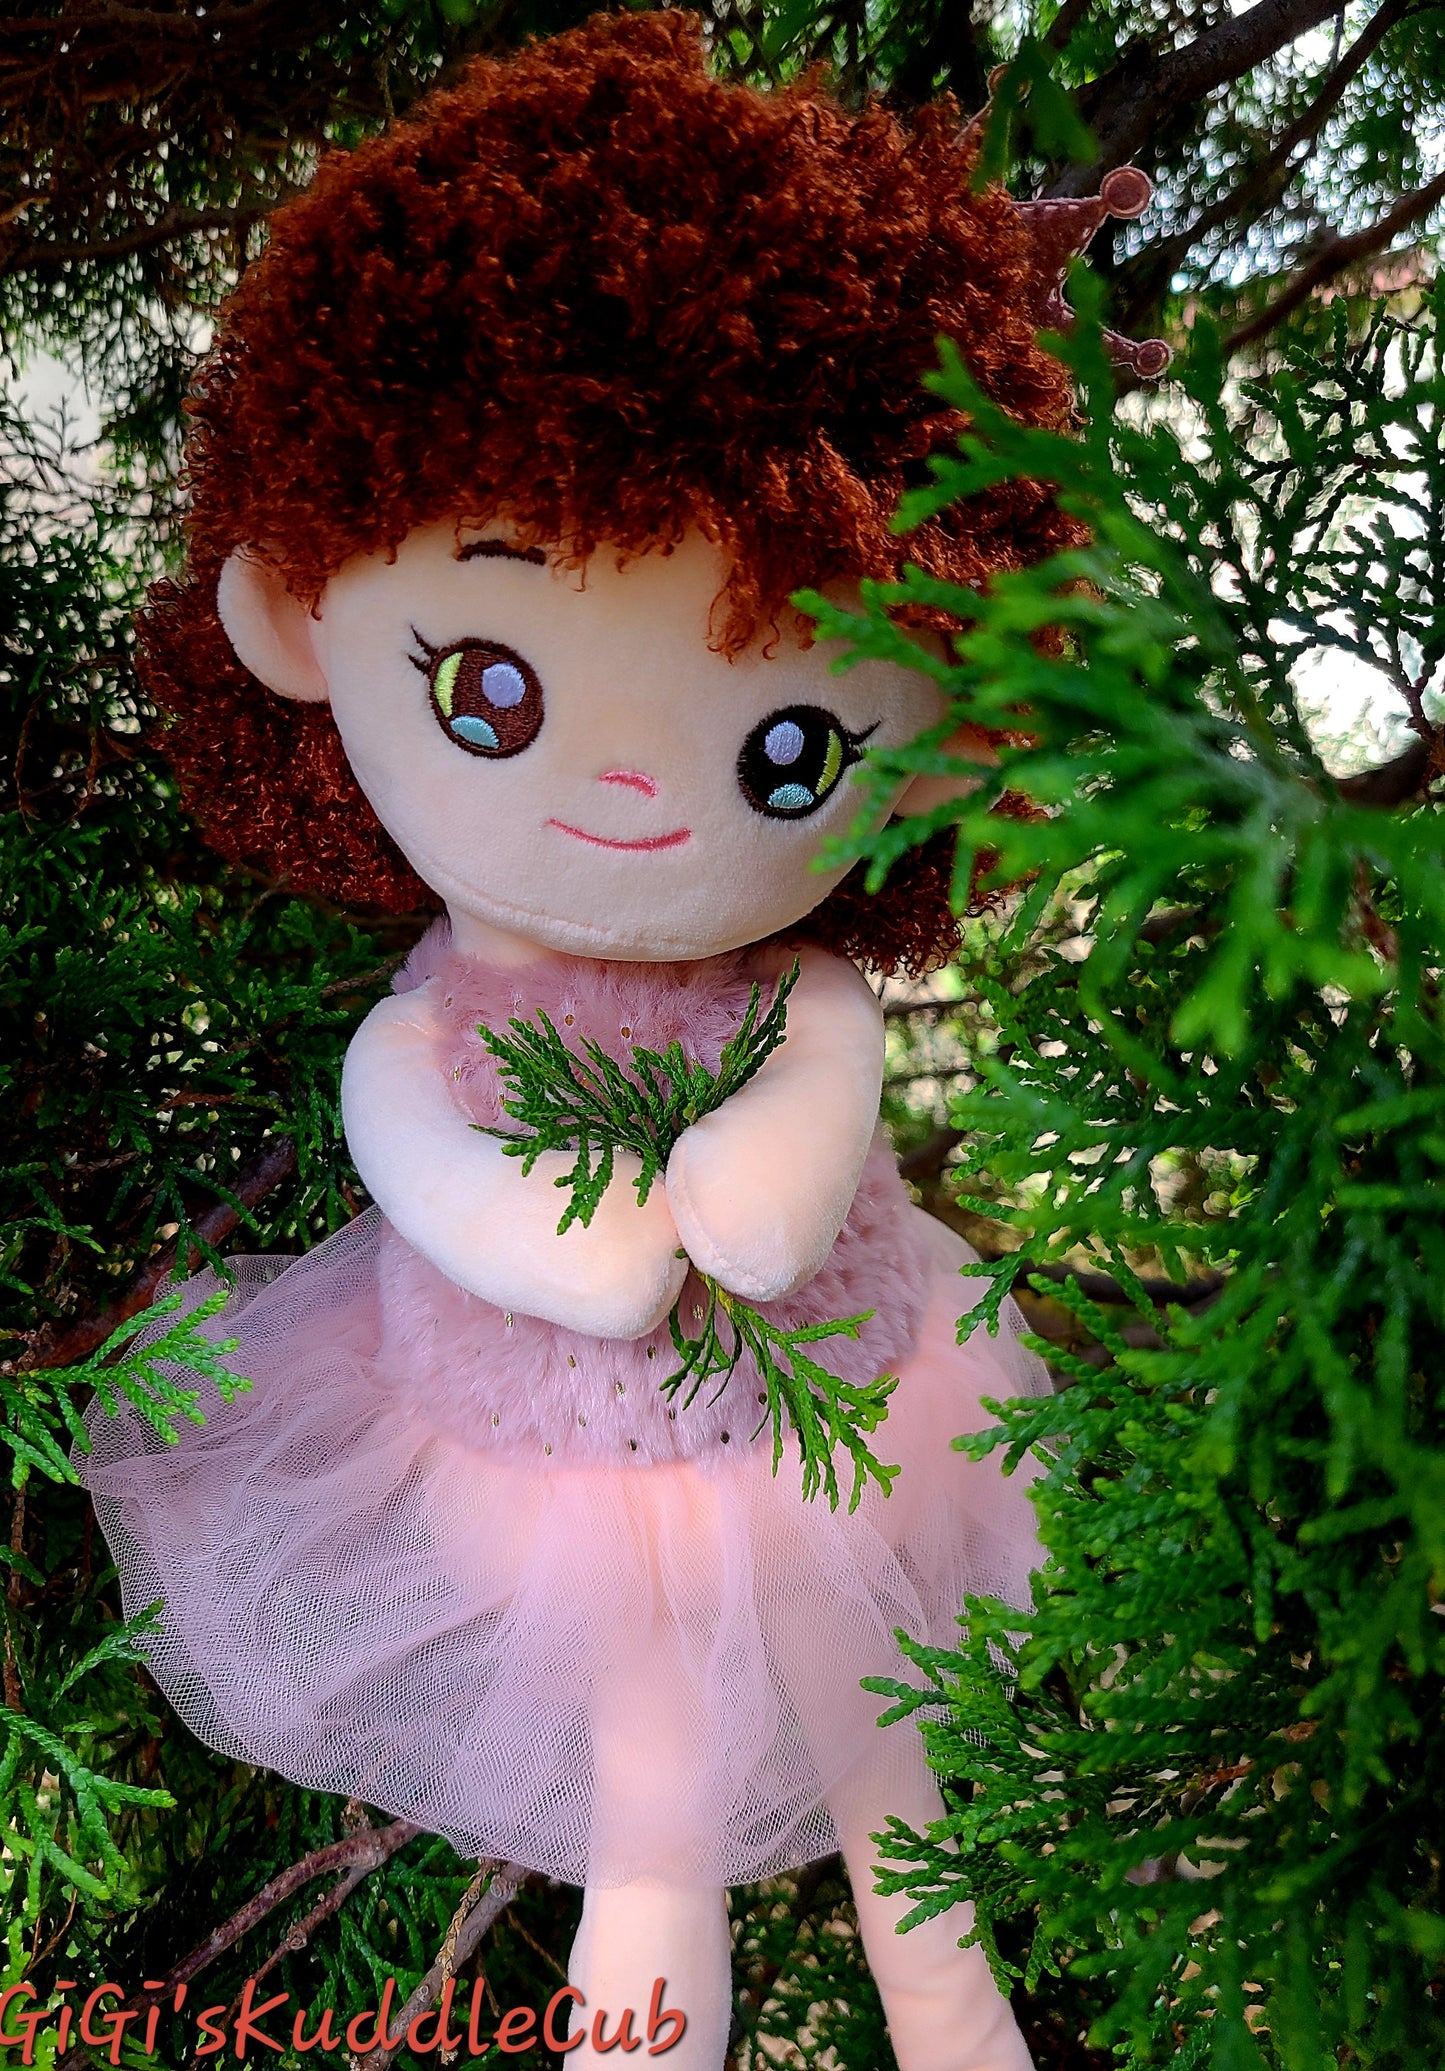 Personalized Soft Plush 15in Curly Red Hair Ballerina Princess Rag Doll Plush Toy/ Decor/Handmade Baby Gift Toy